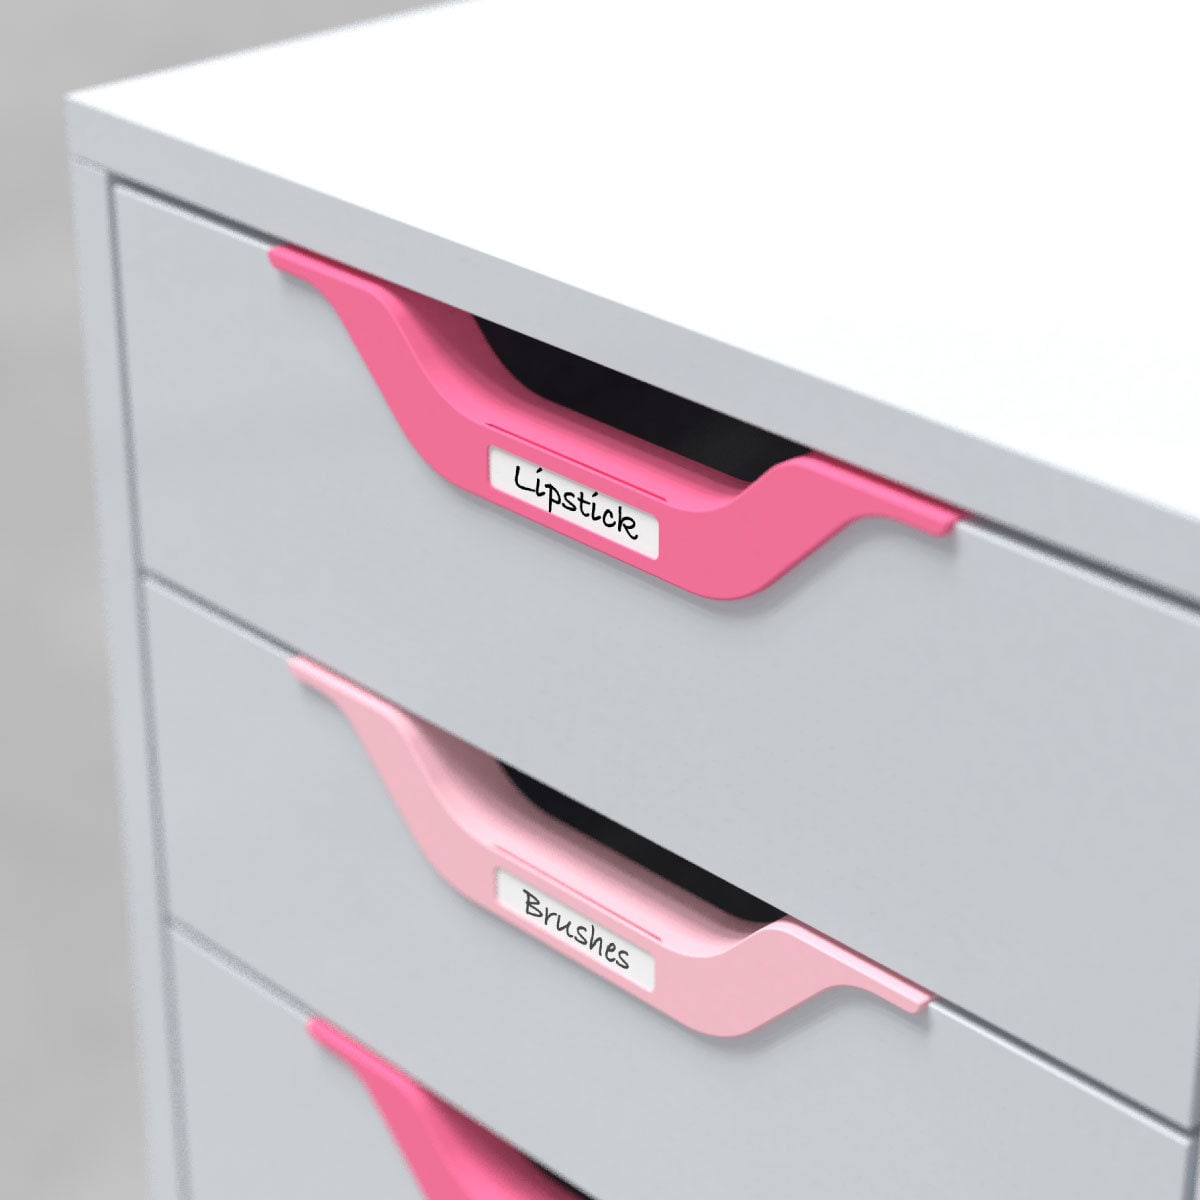 Customized Decals for IKEA Alex Drawer Unit (FURNITURE NOT INCLUDED) – My  Wonderful Walls